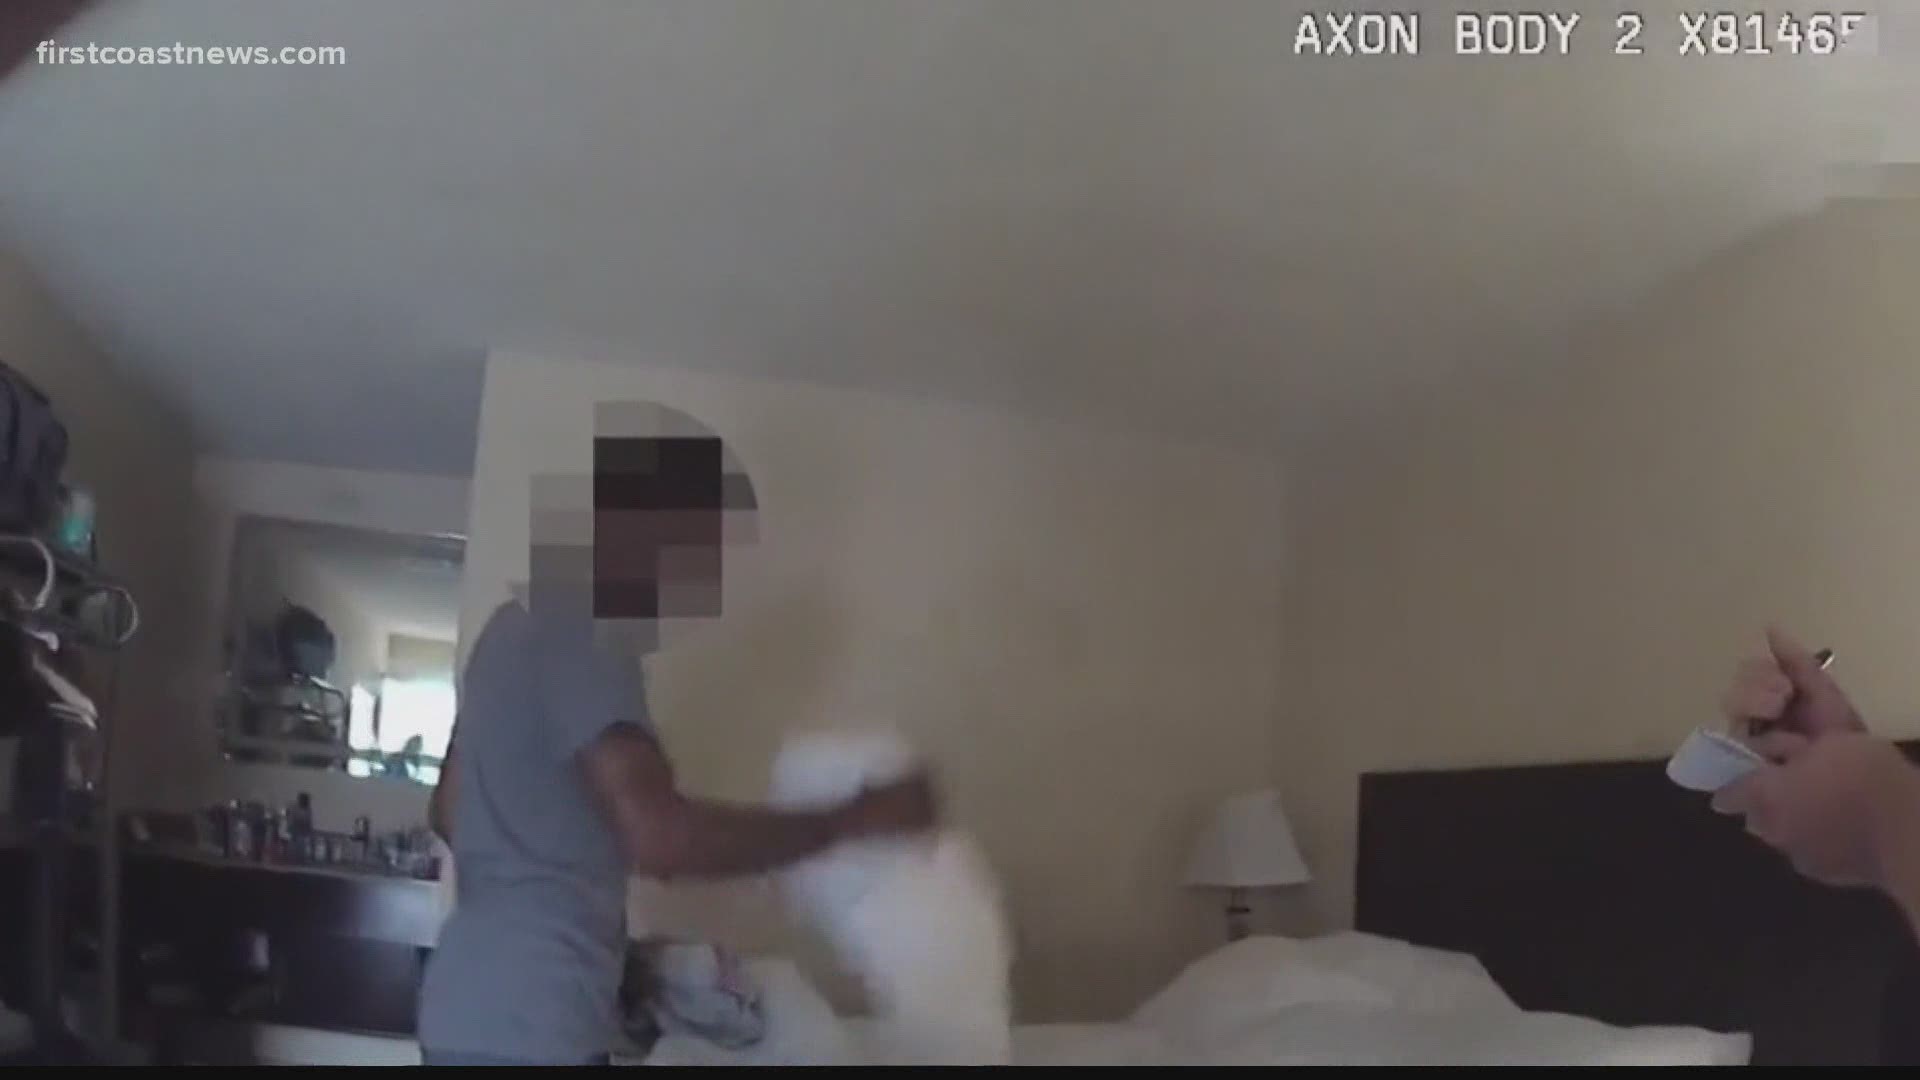 Deadly police shooting bodycam footage released from Jacksonville hotel incident